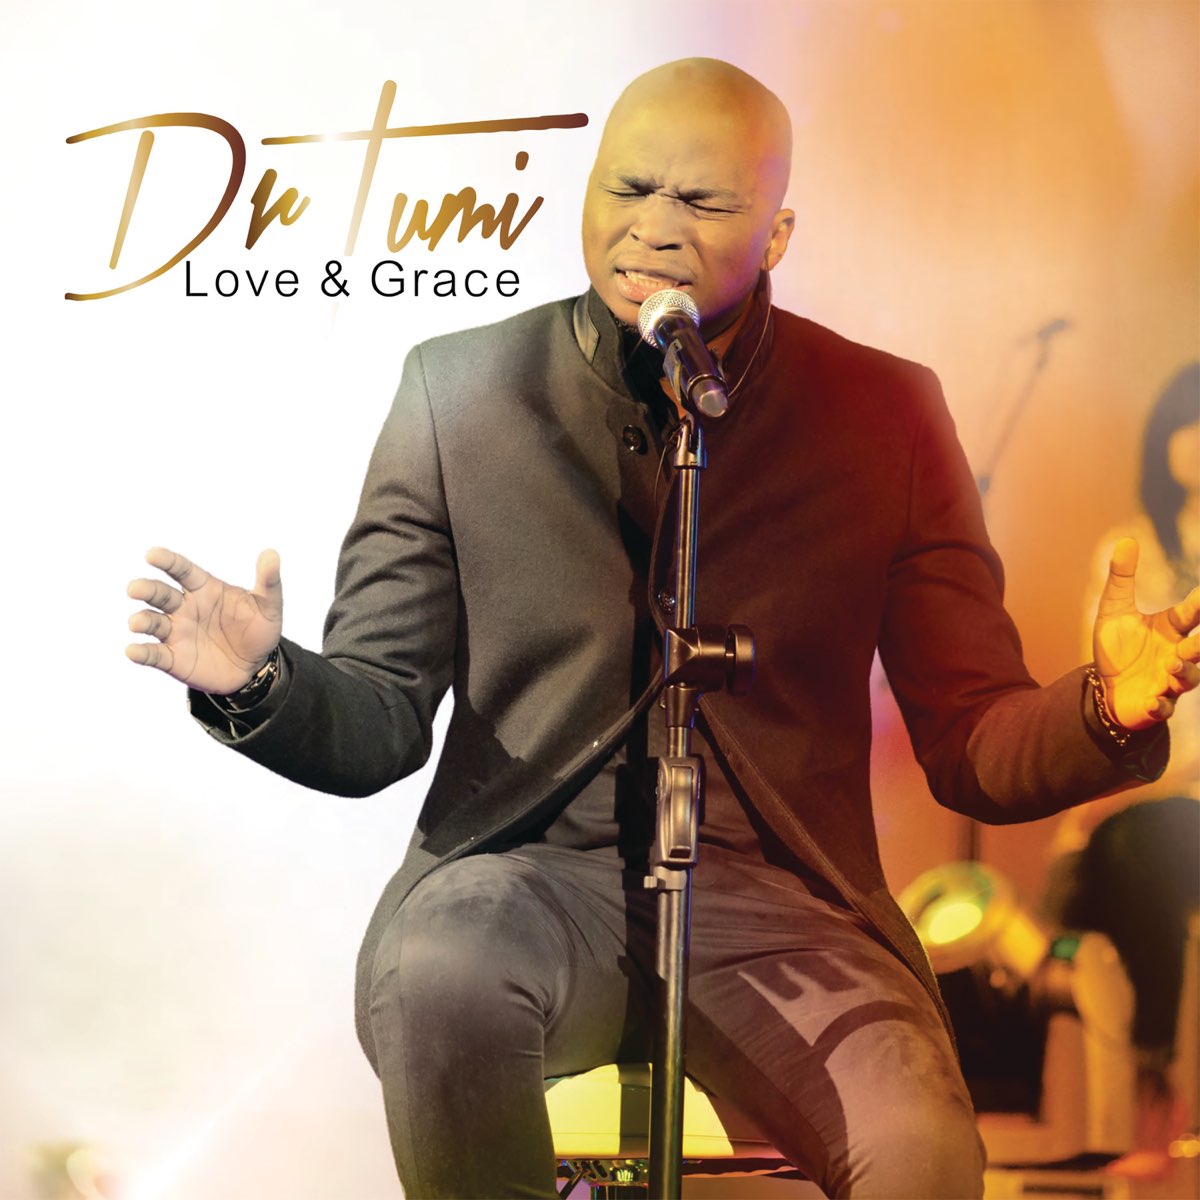 Love & Grace (Live at the Barnyard Theatre) [Deluxe Version] by Dr Tumi on  Apple Music